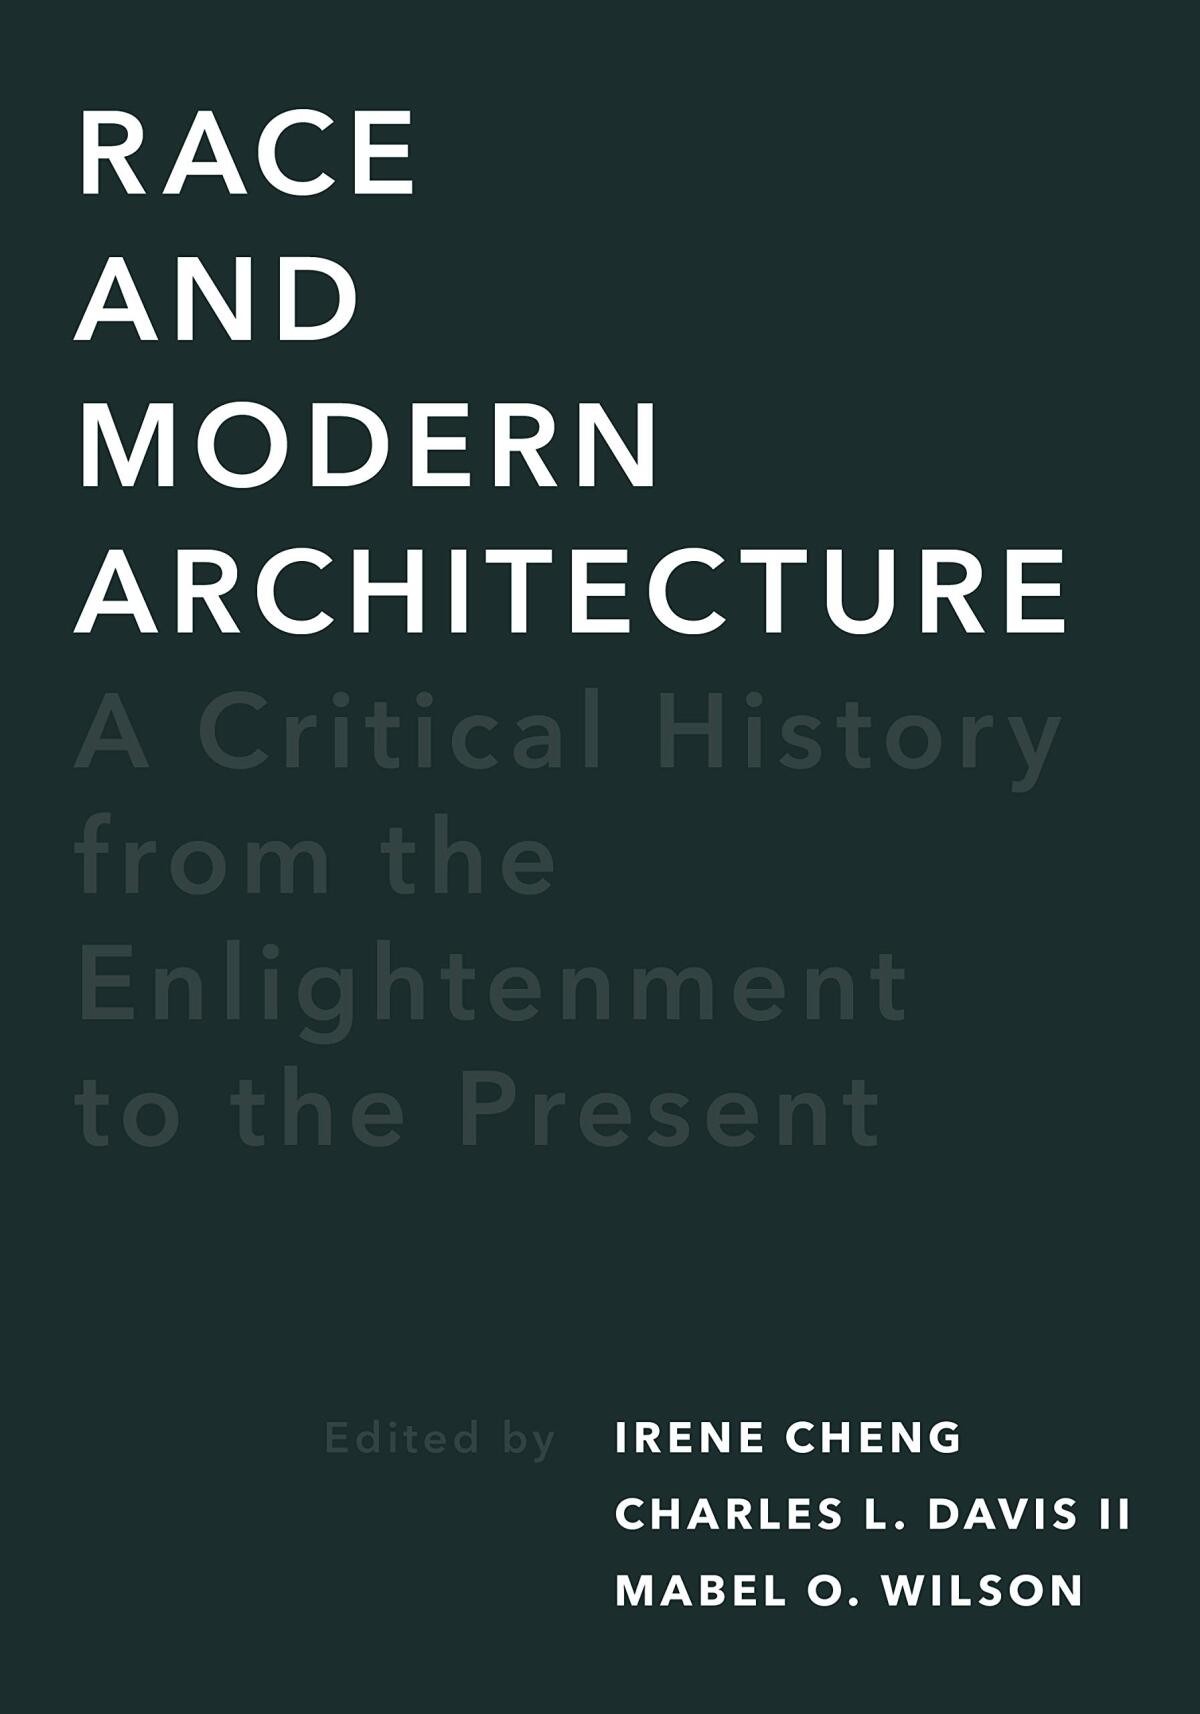 A dark blue/black book cover features the title "Race and Modern Architecture" in bold white type